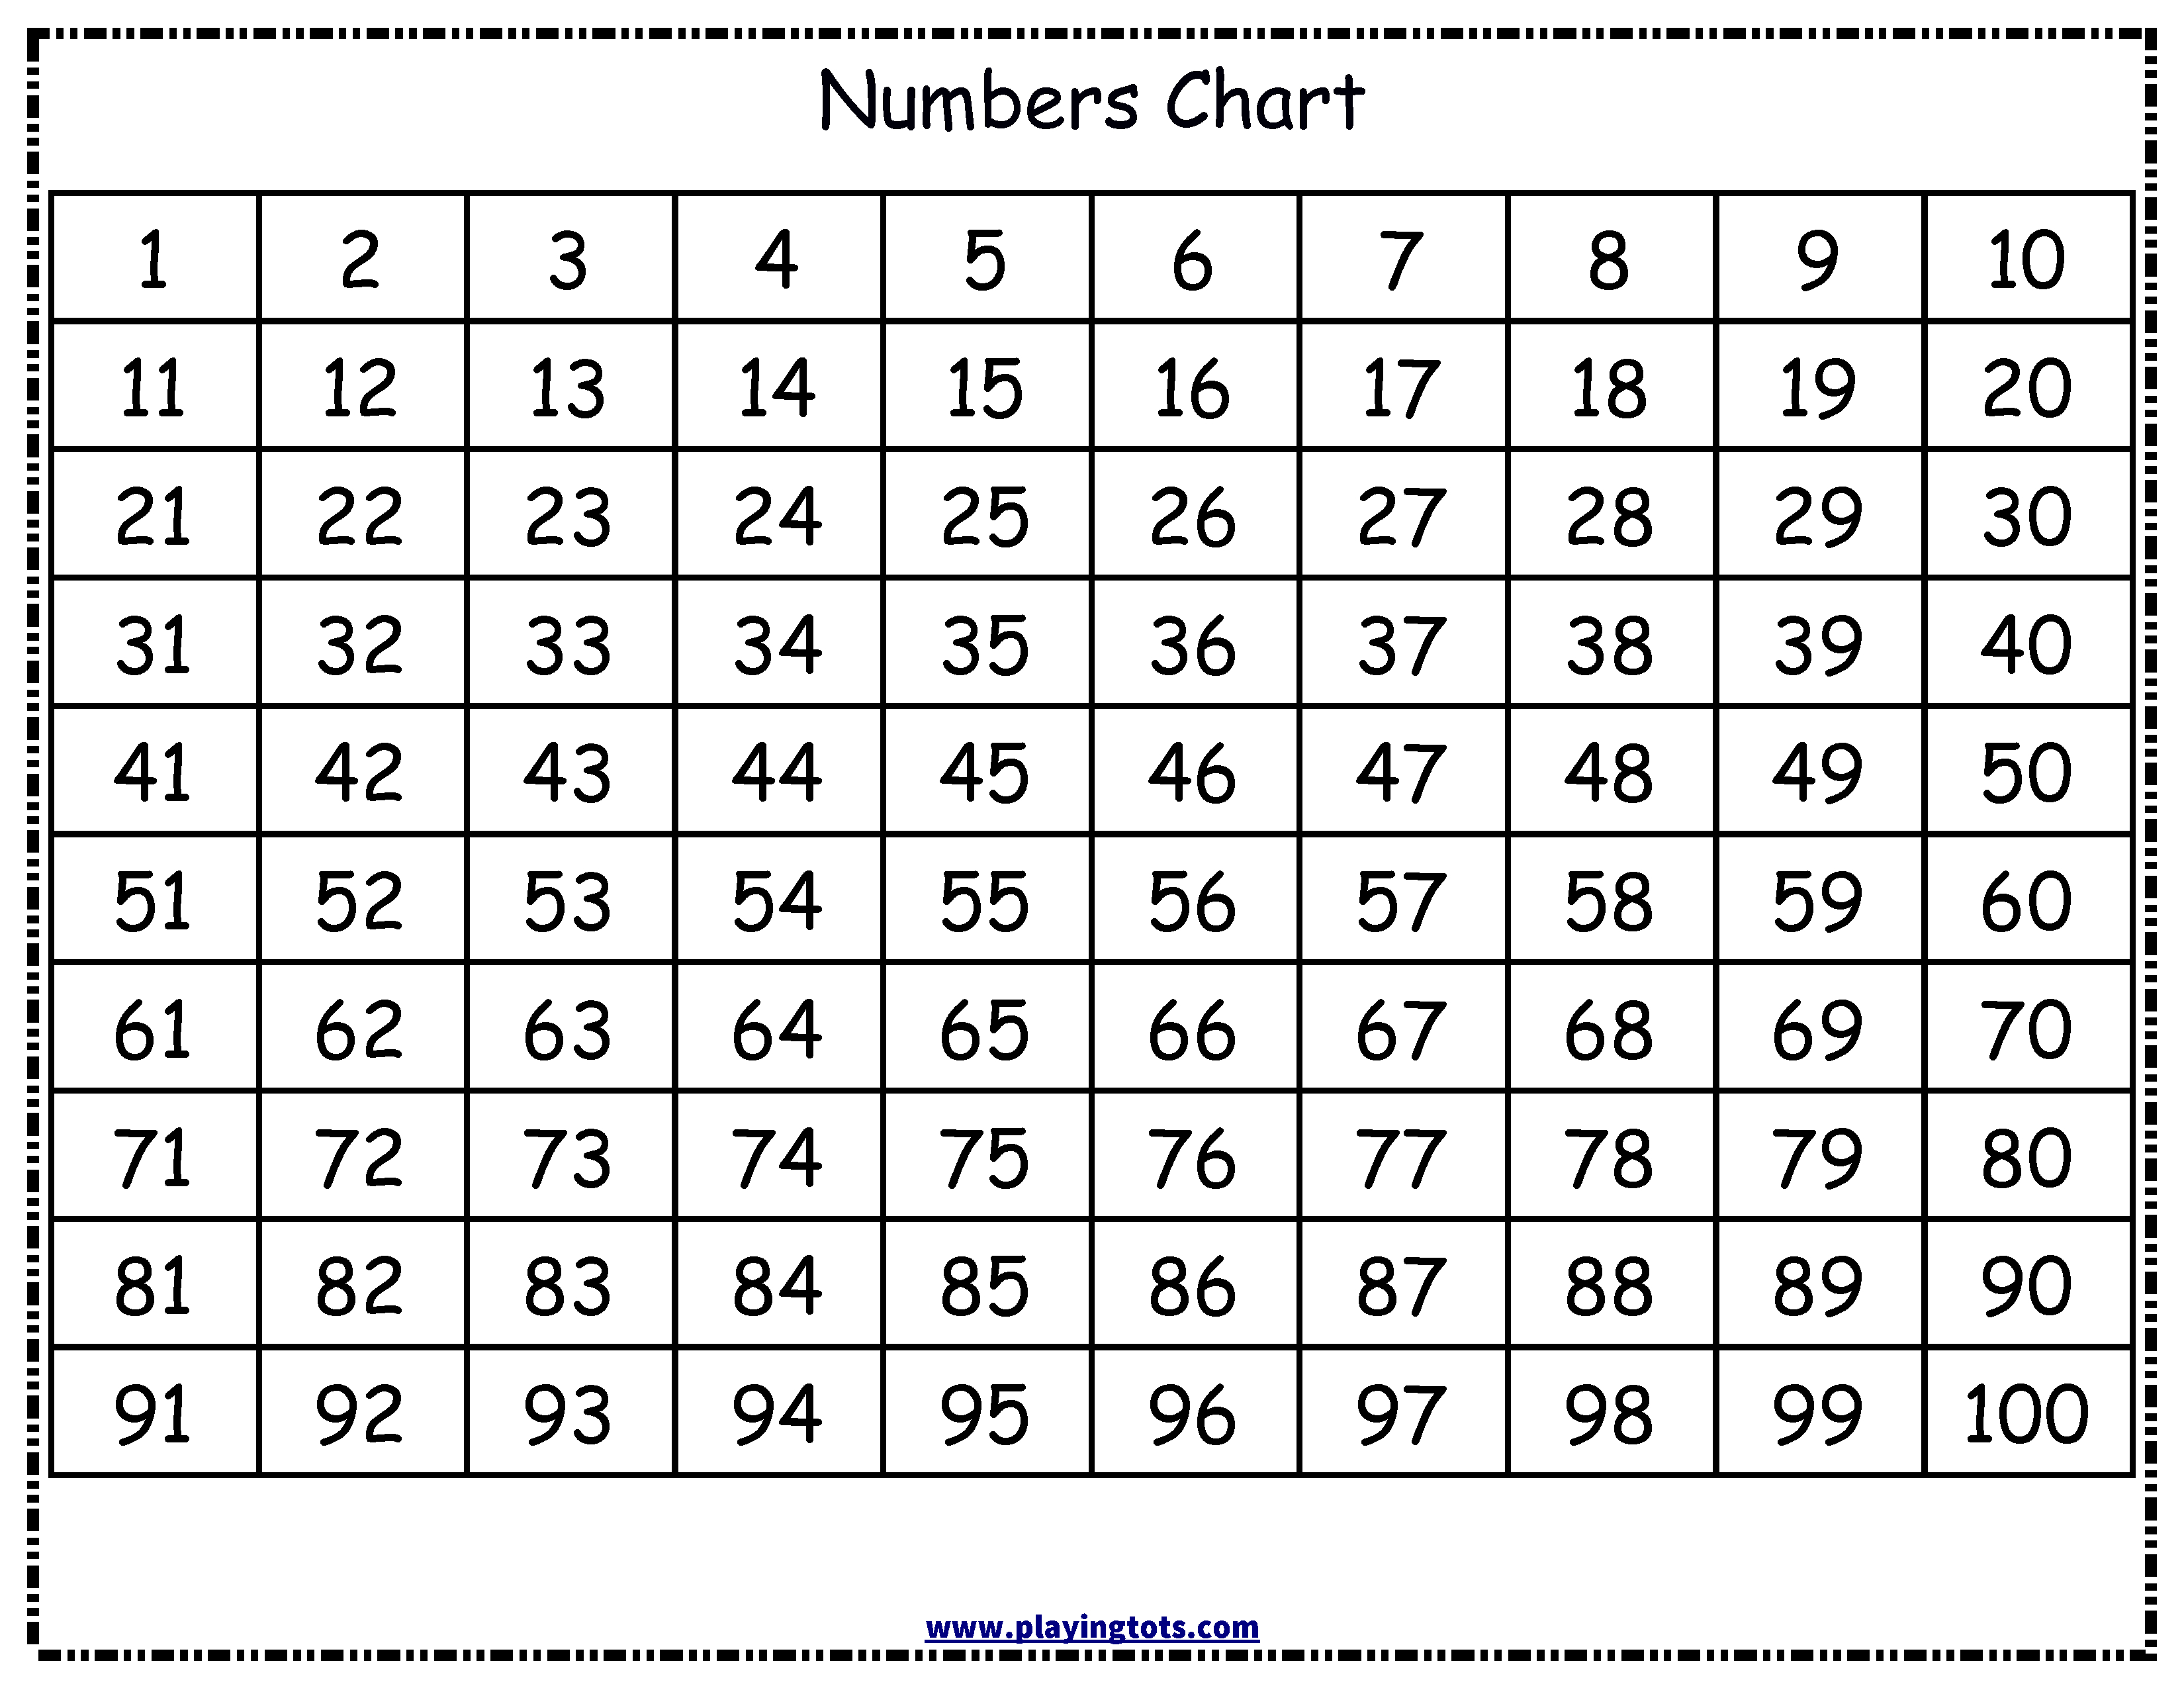 Free Printable Number Charts And 100 Charts For Counting Skip 